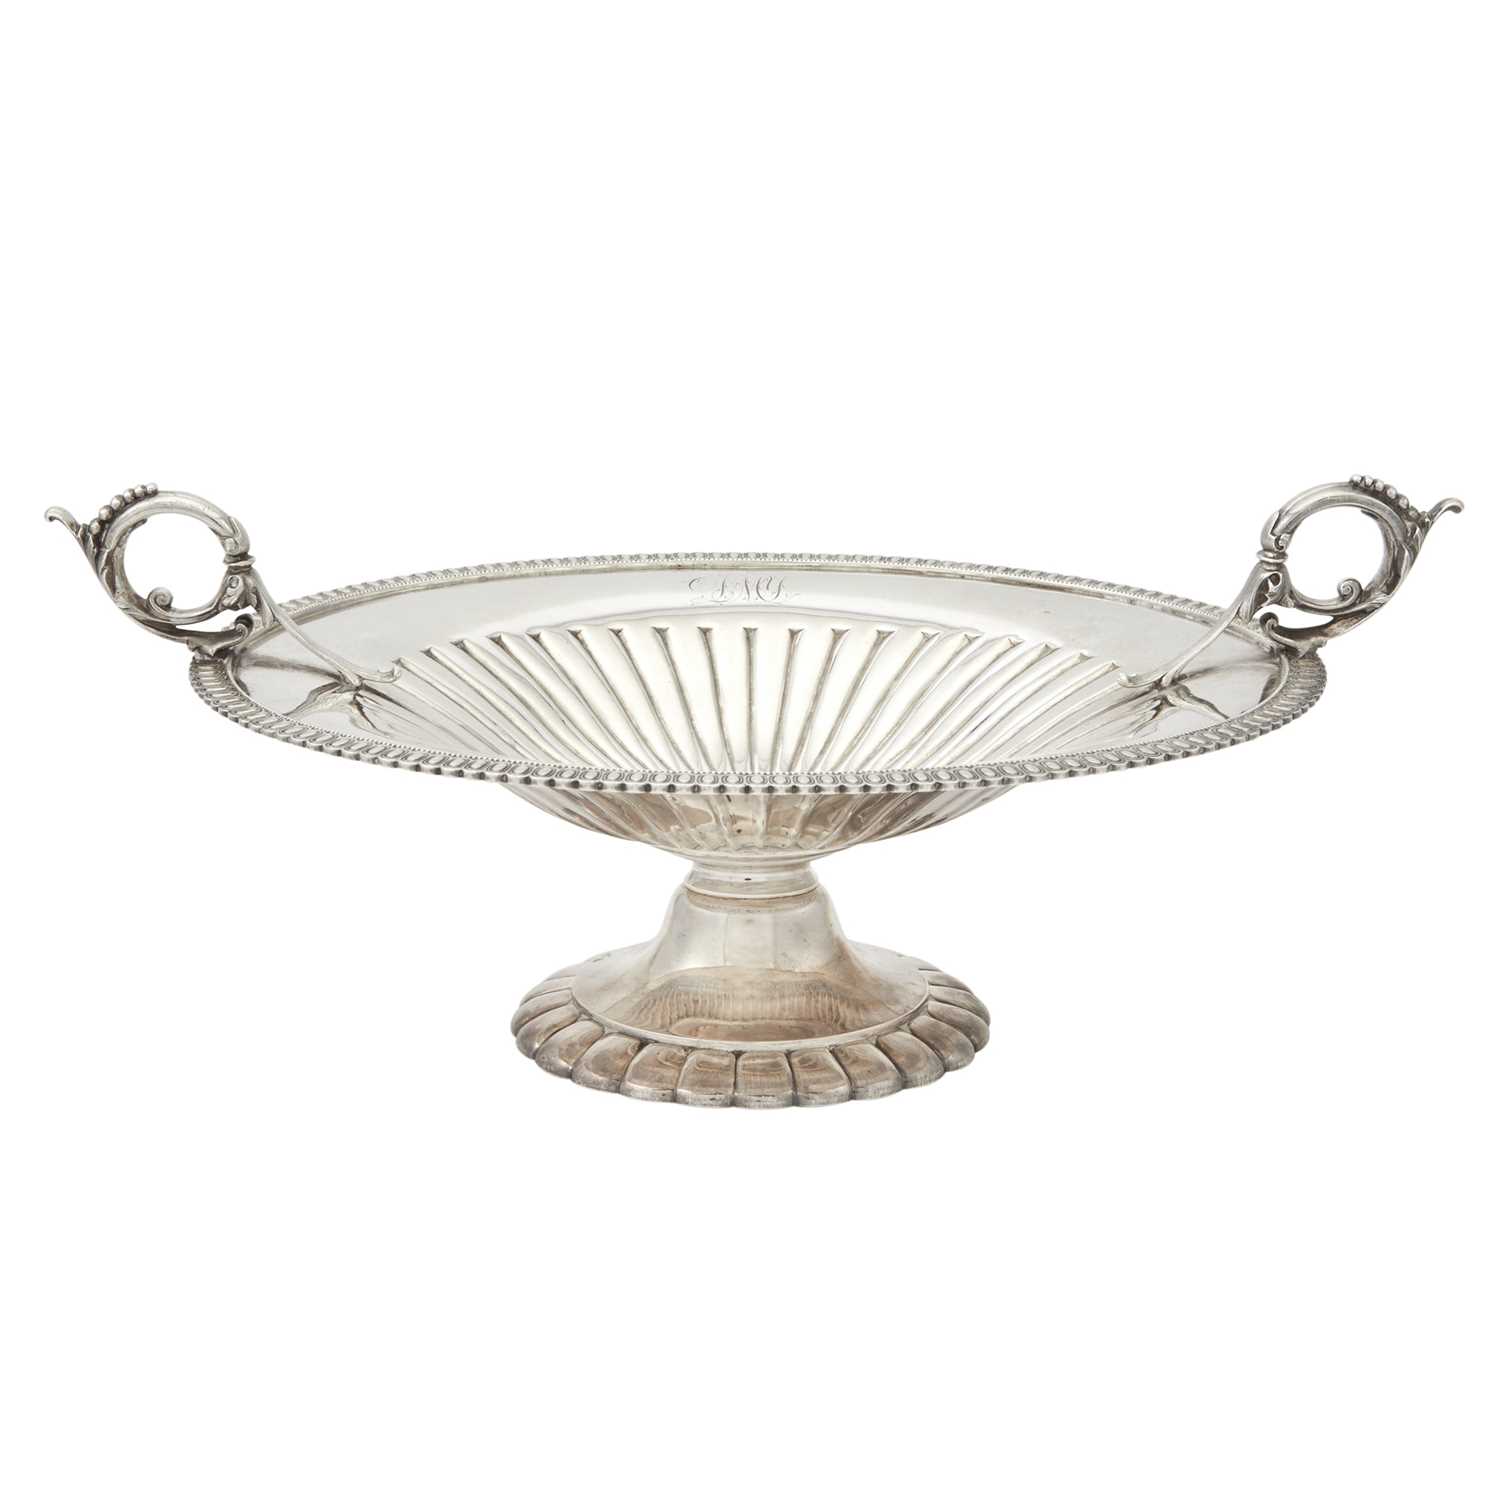 Lot 137 - American Sterling Silver Compote